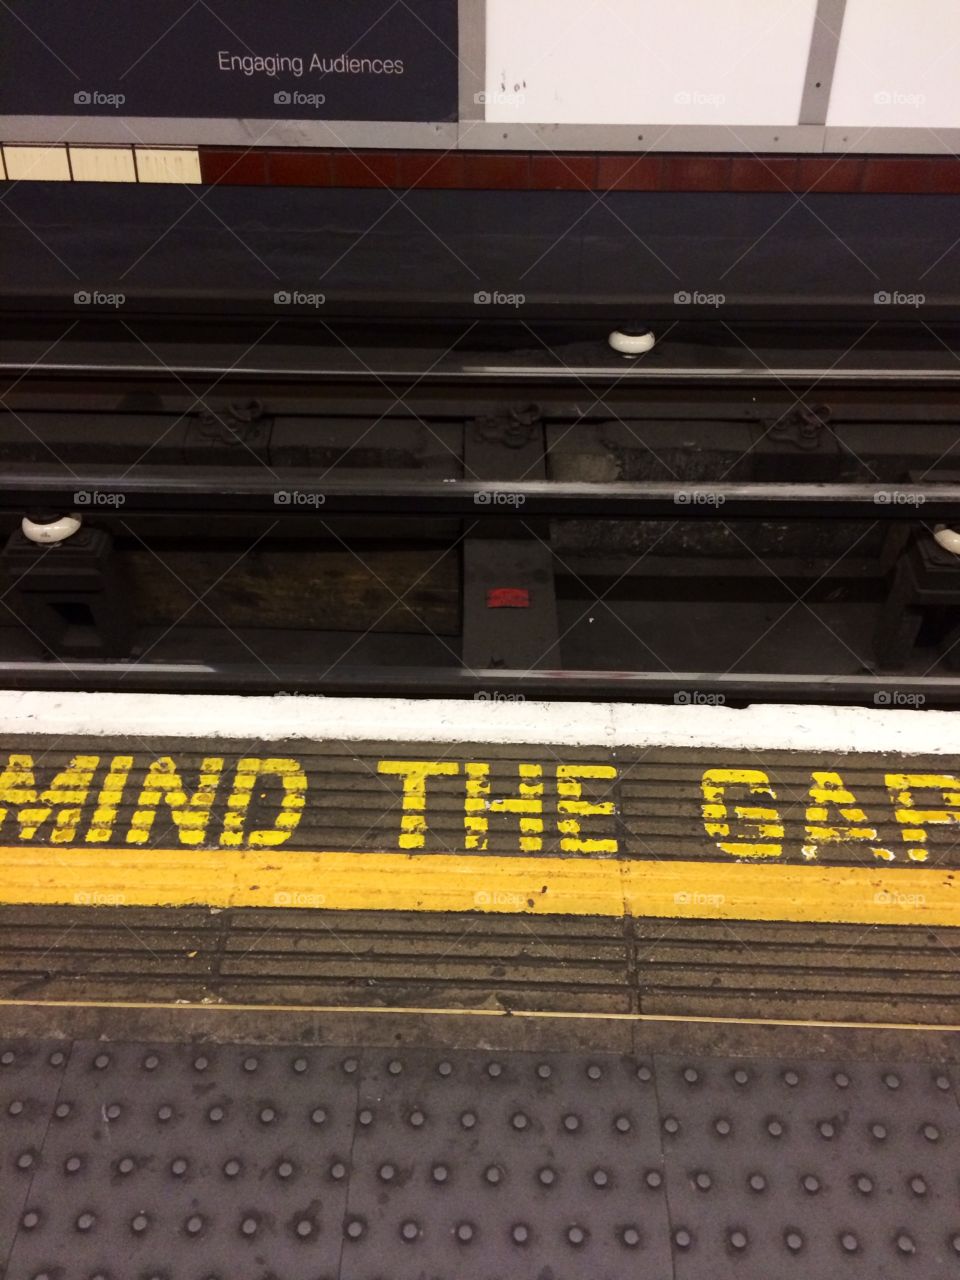 Underground Rails. The classic “Mind the Gap” on the Underground platform. Something quite charming about the style of the tube. 